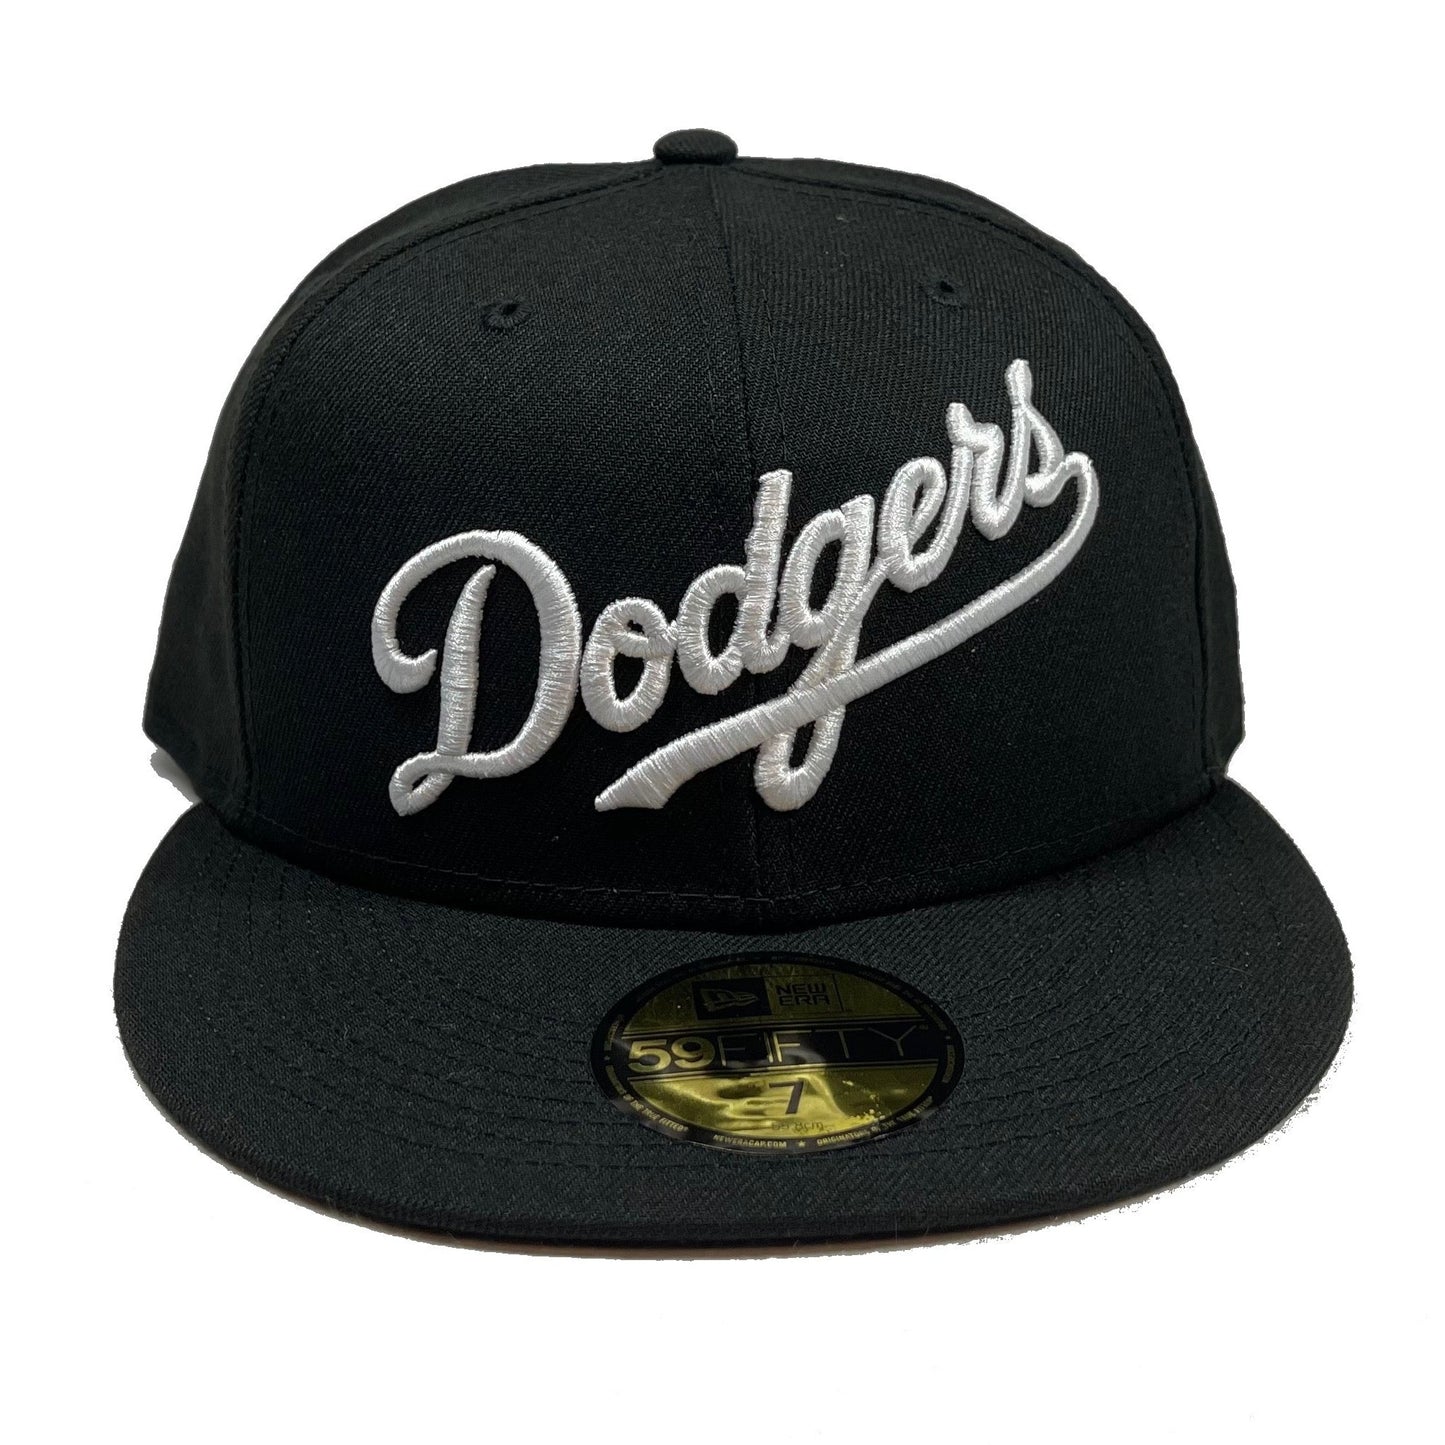 Los Angeles Dodgers (Black) Snapback/Fitted